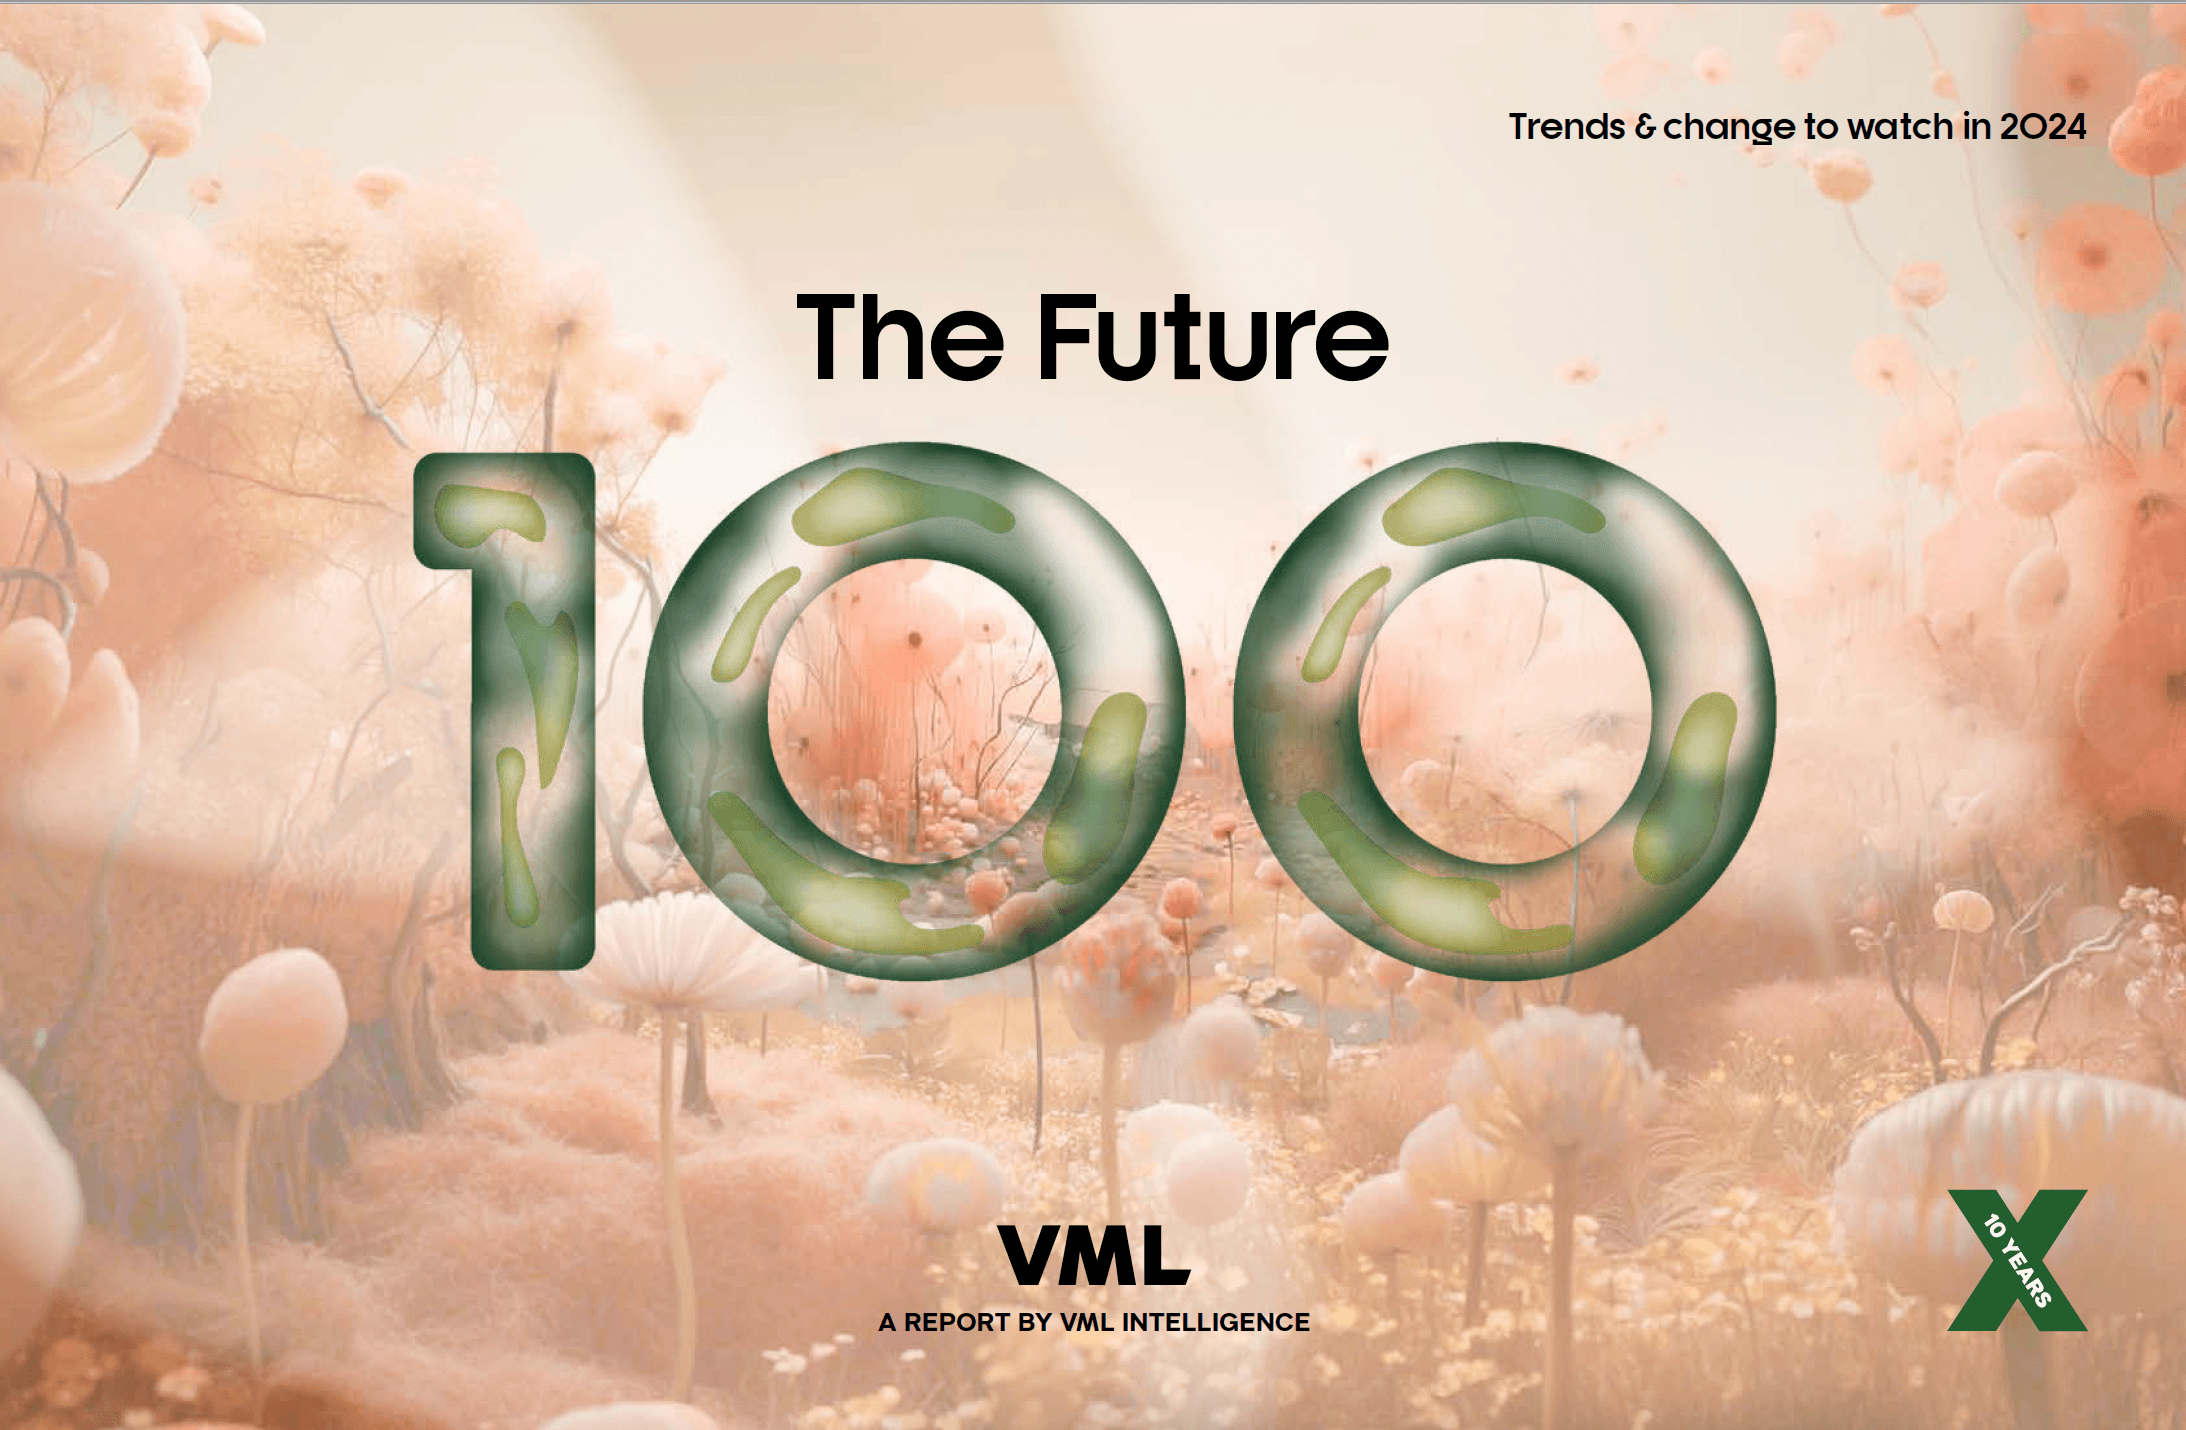 The future 100 by VML